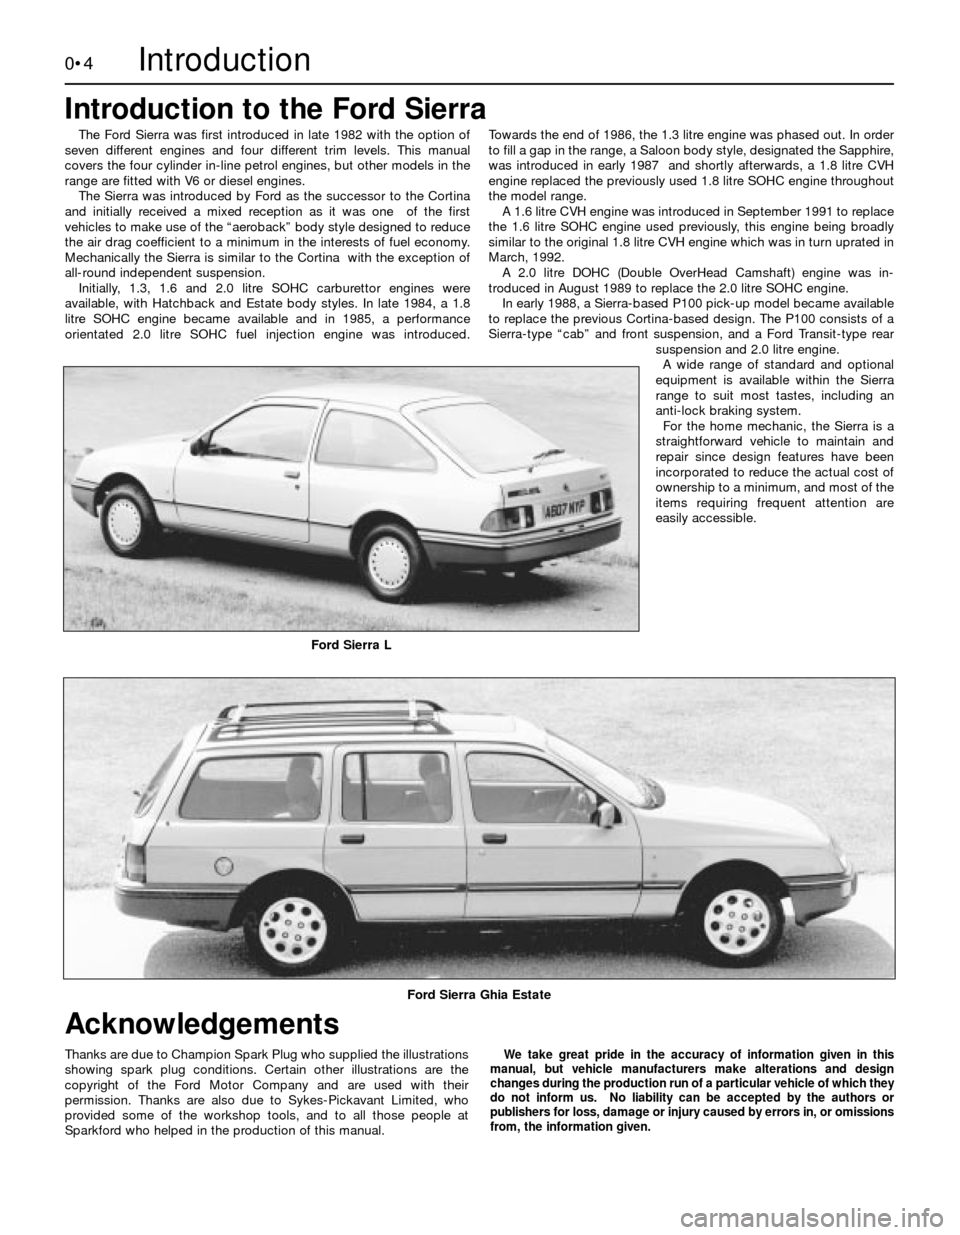 FORD SIERRA 1988 2.G Introduction Workshop Manual 0•4
The Ford Sierra was first introduced in late 1982 with the option of
seven different engines and four different trim levels. This manual
covers the four cylinder in-line petrol engines, but othe